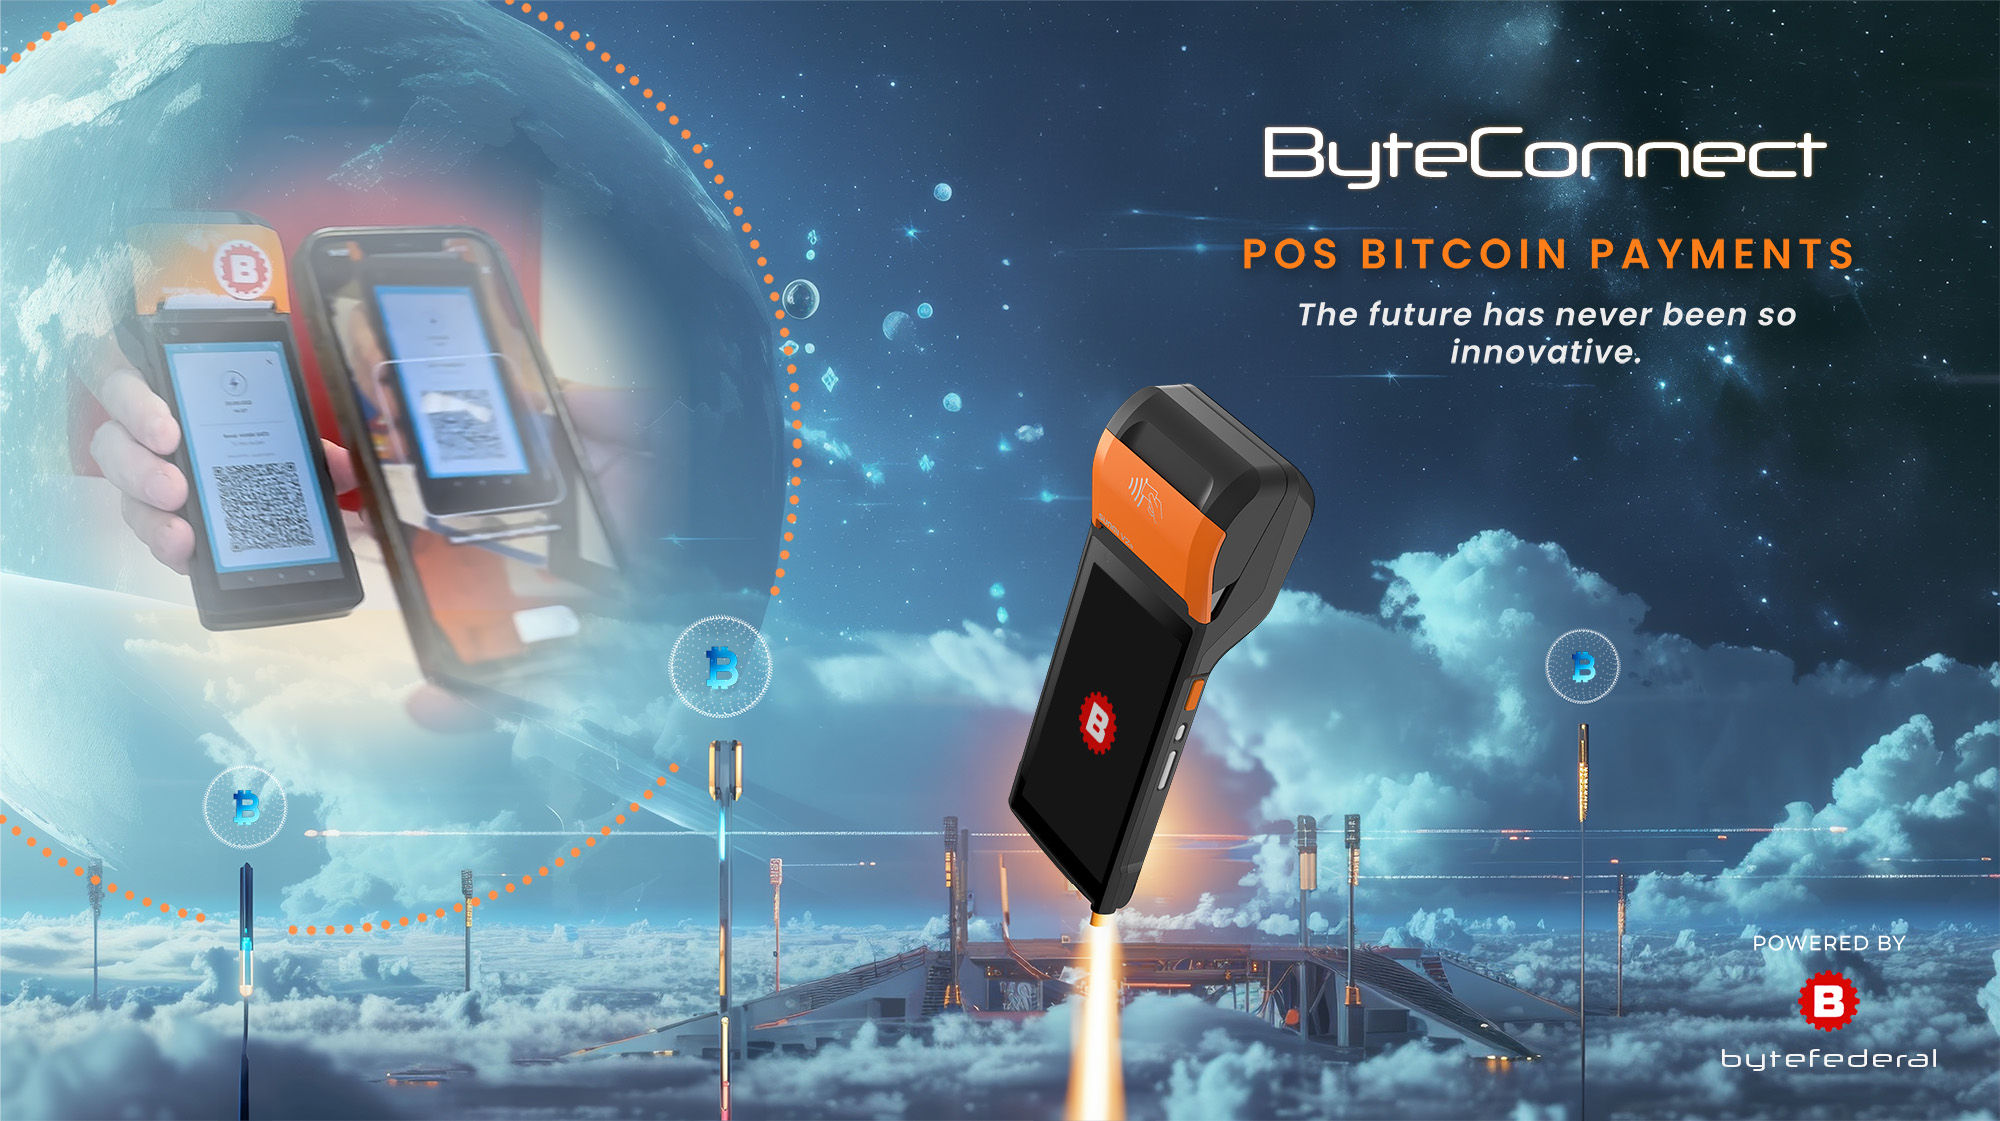 The launch of Byte Federal's merchant POS system is not just a milestone for the company, but also a significant development for the global cryptocurrency landscape.